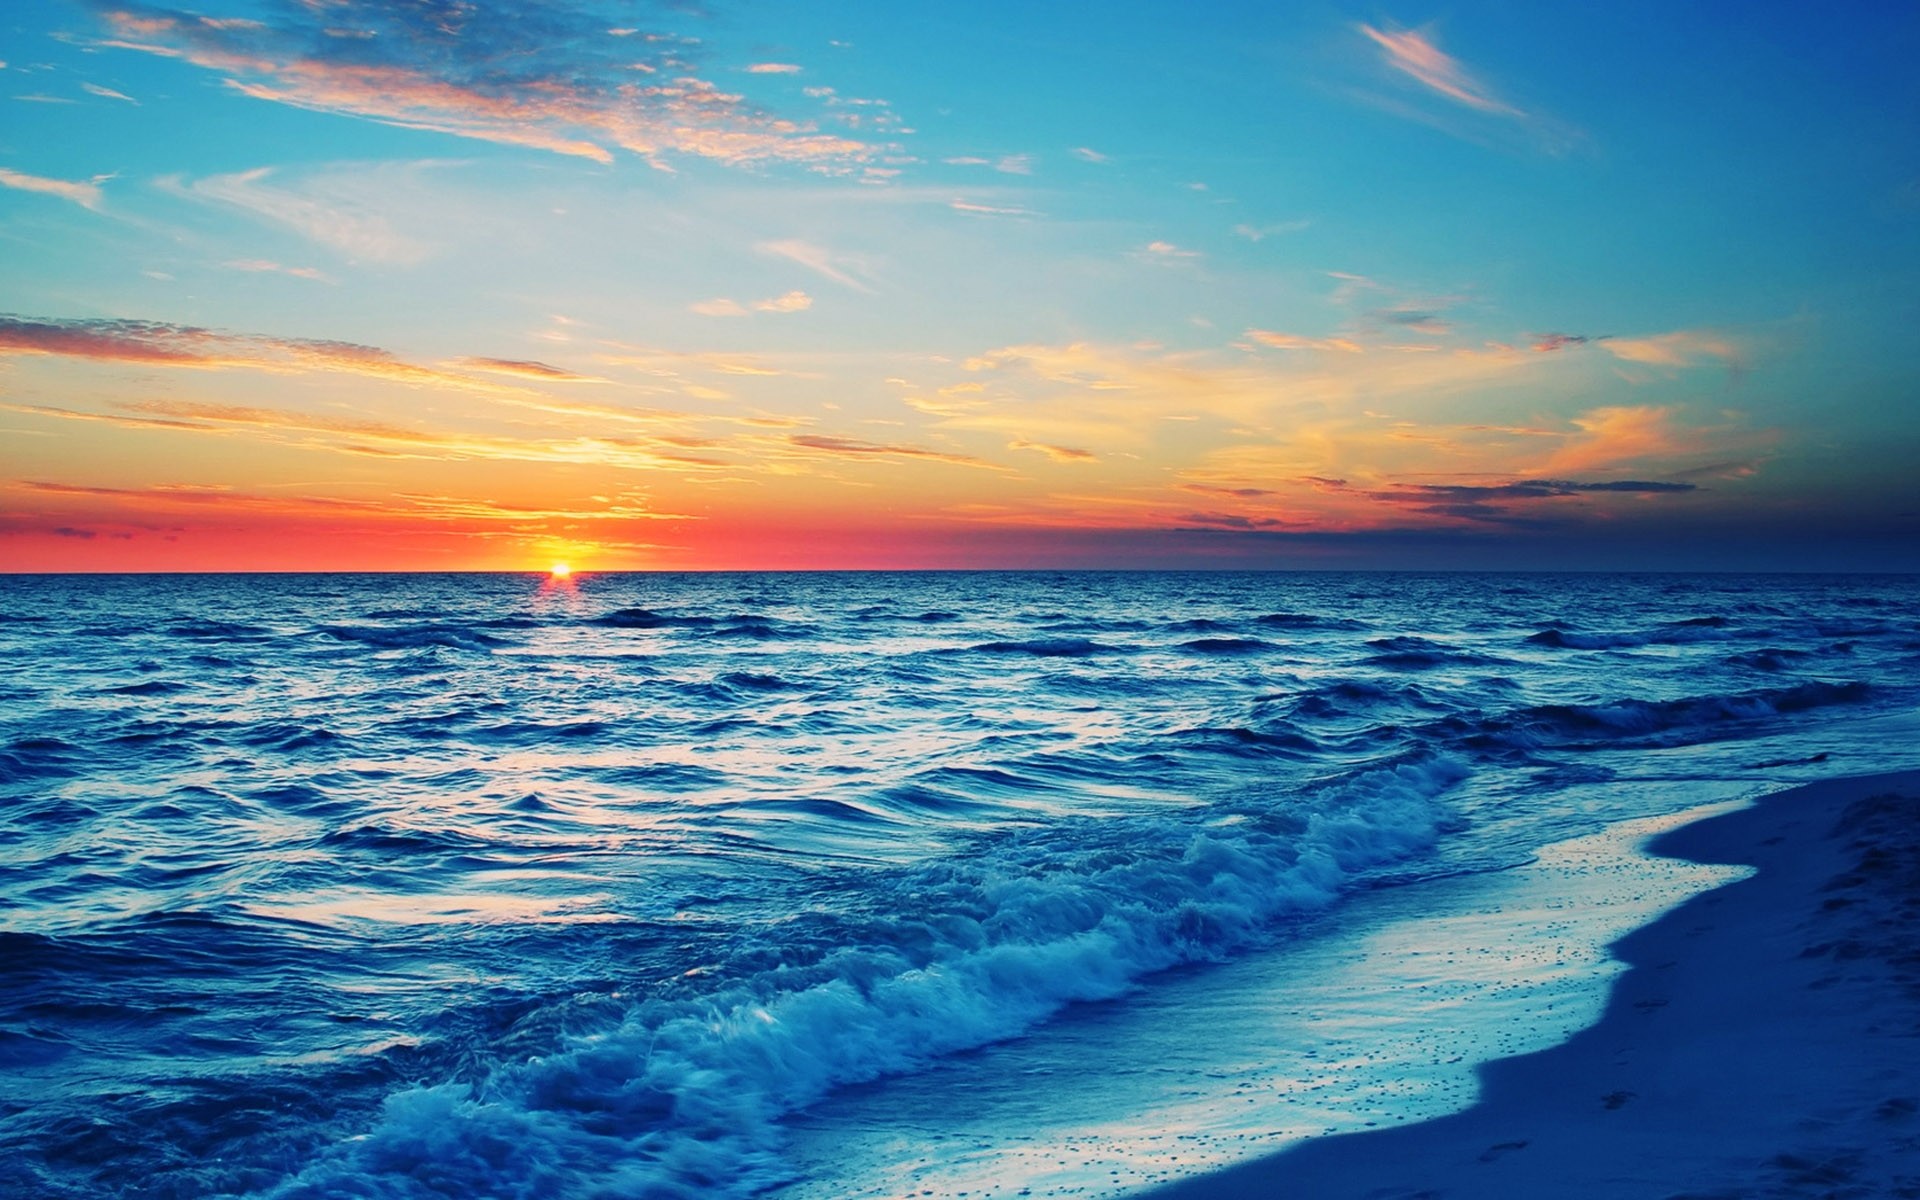 Beaches Hd wallpaper for download